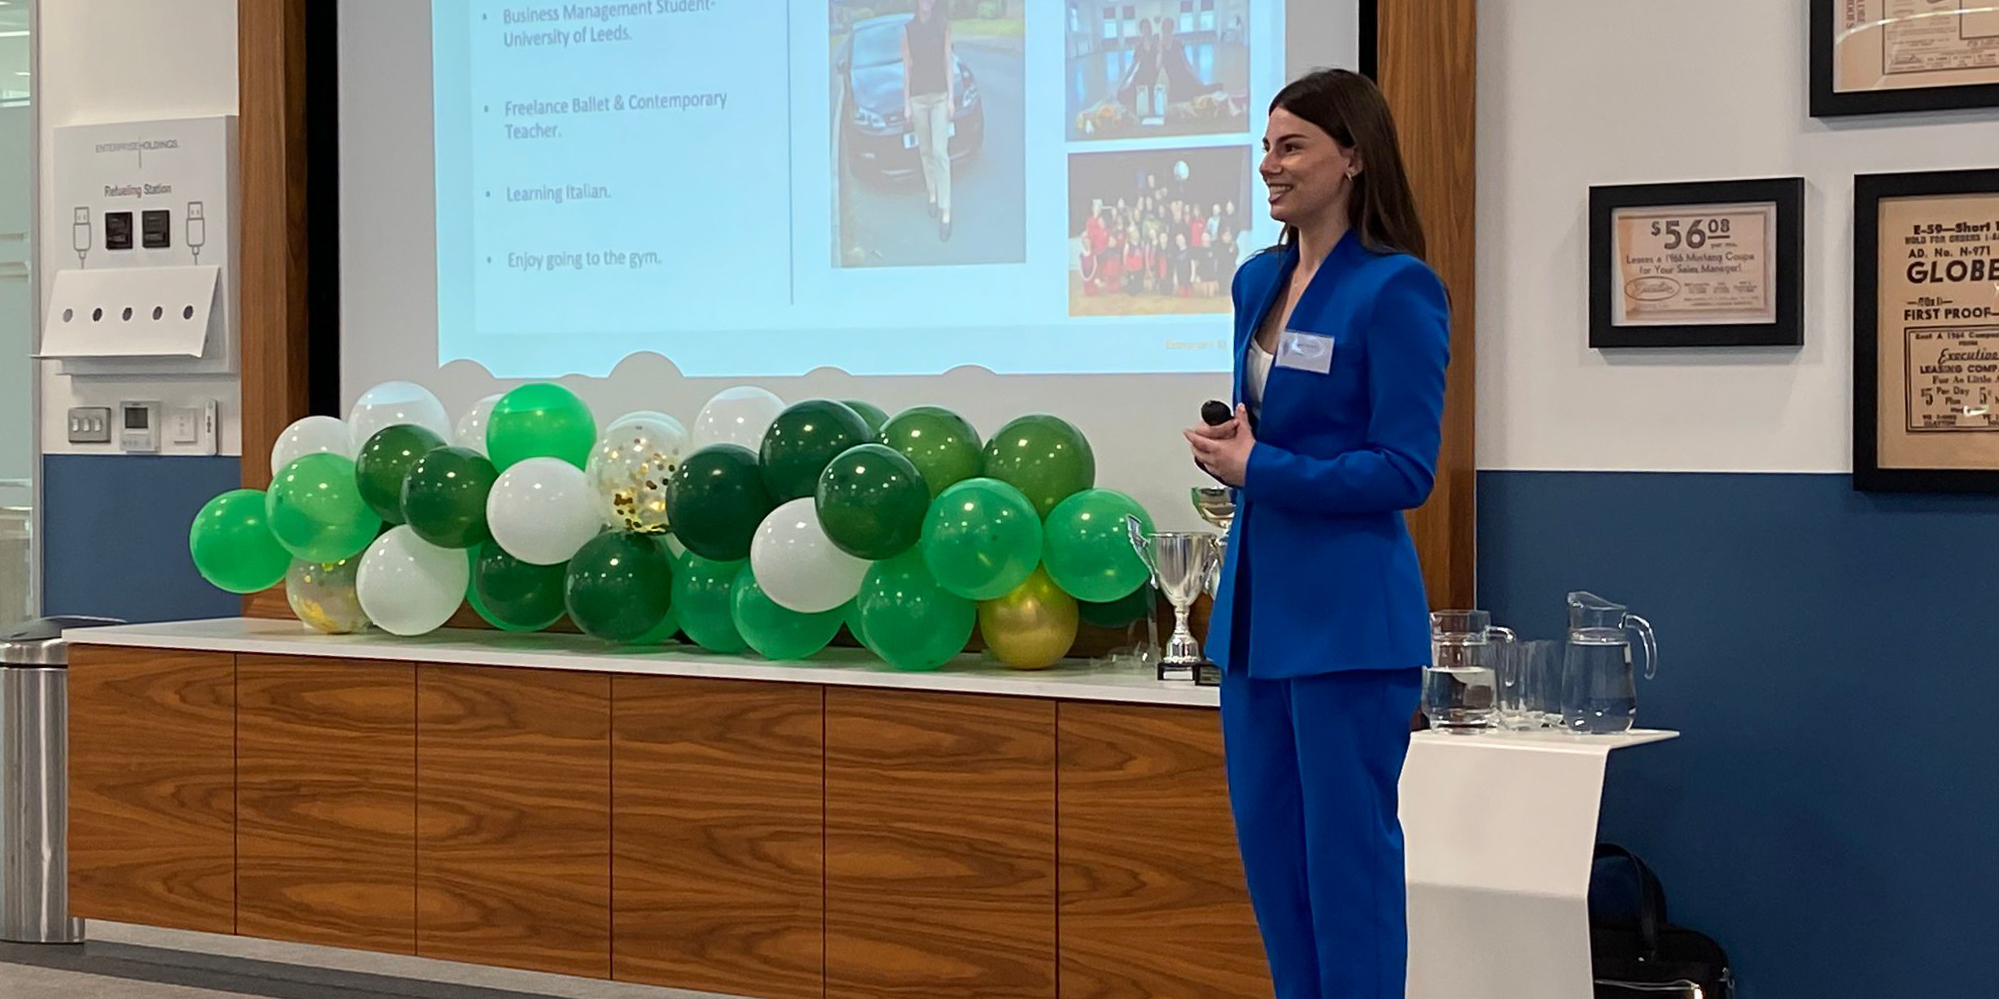 Sophie talks to crowd, whilst smiling, in front of balloons and a presentation about her business idea.